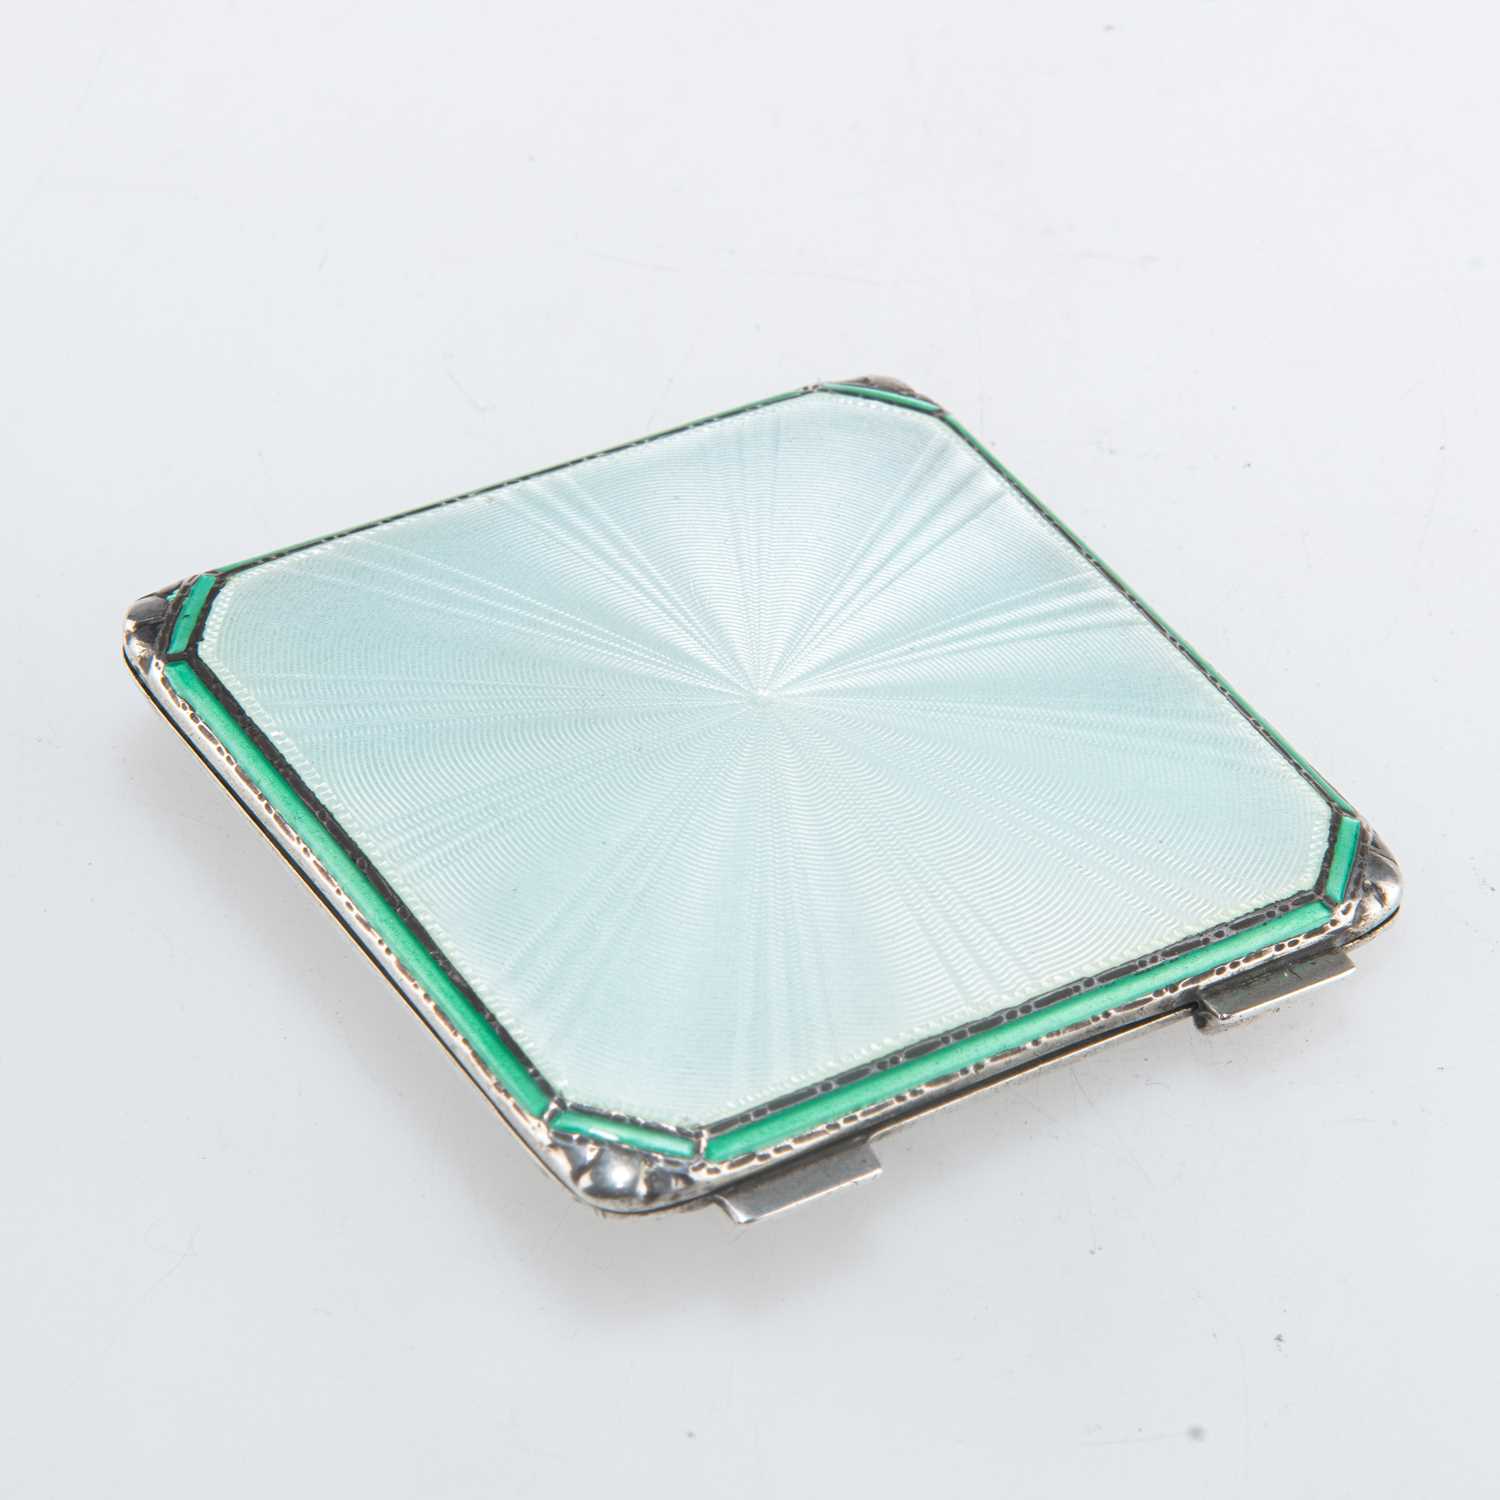 A GEORGE VI SILVER AND ENAMEL COMPACT